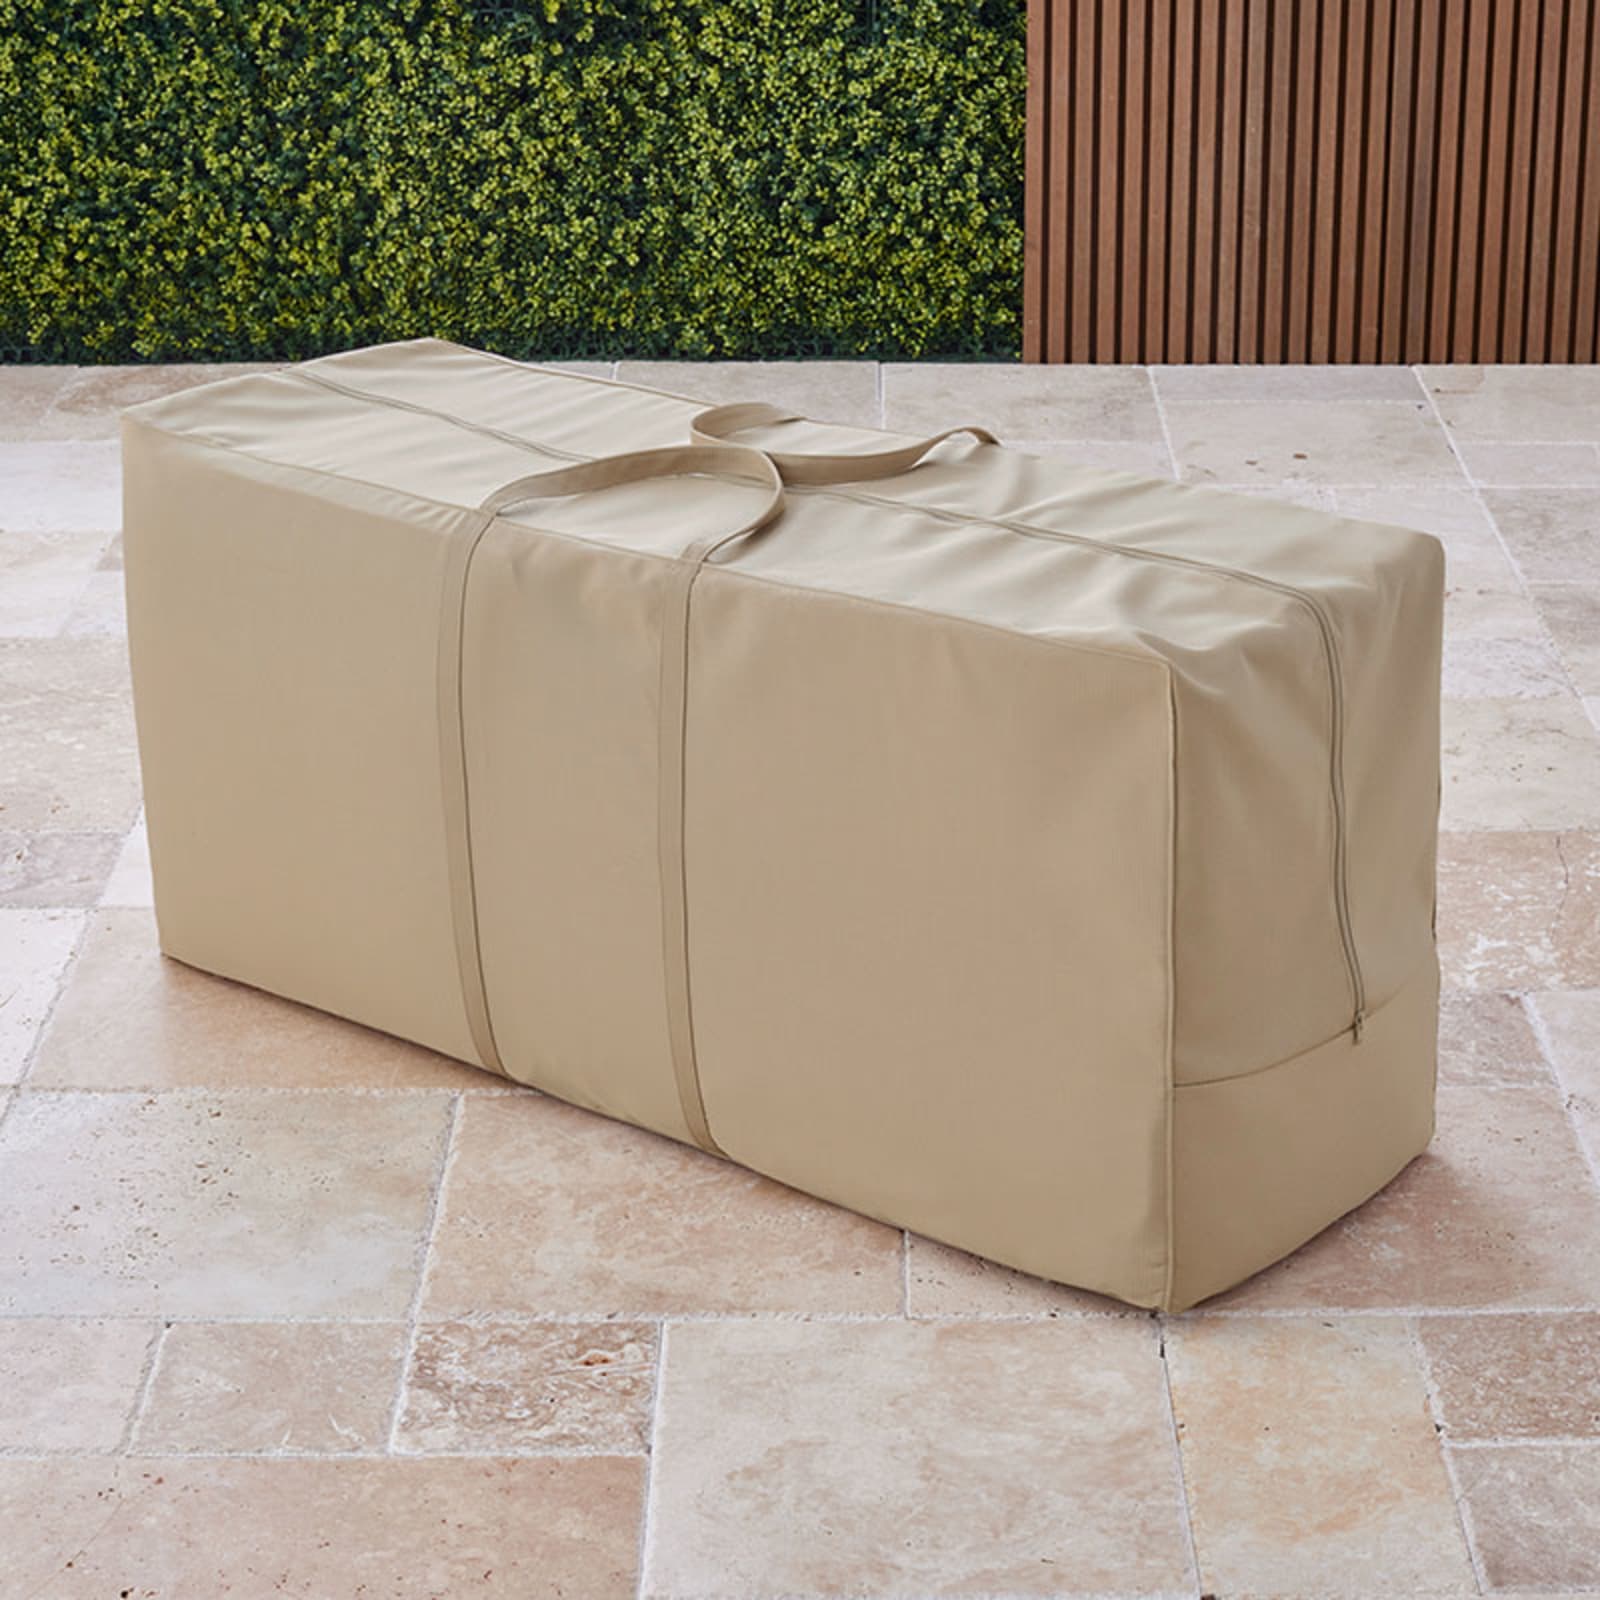 Car Cover Storage Bags For Anti-Rust - Zip Up Vehicle Cover for Storage -  Enclosed Automotive Bag Cover